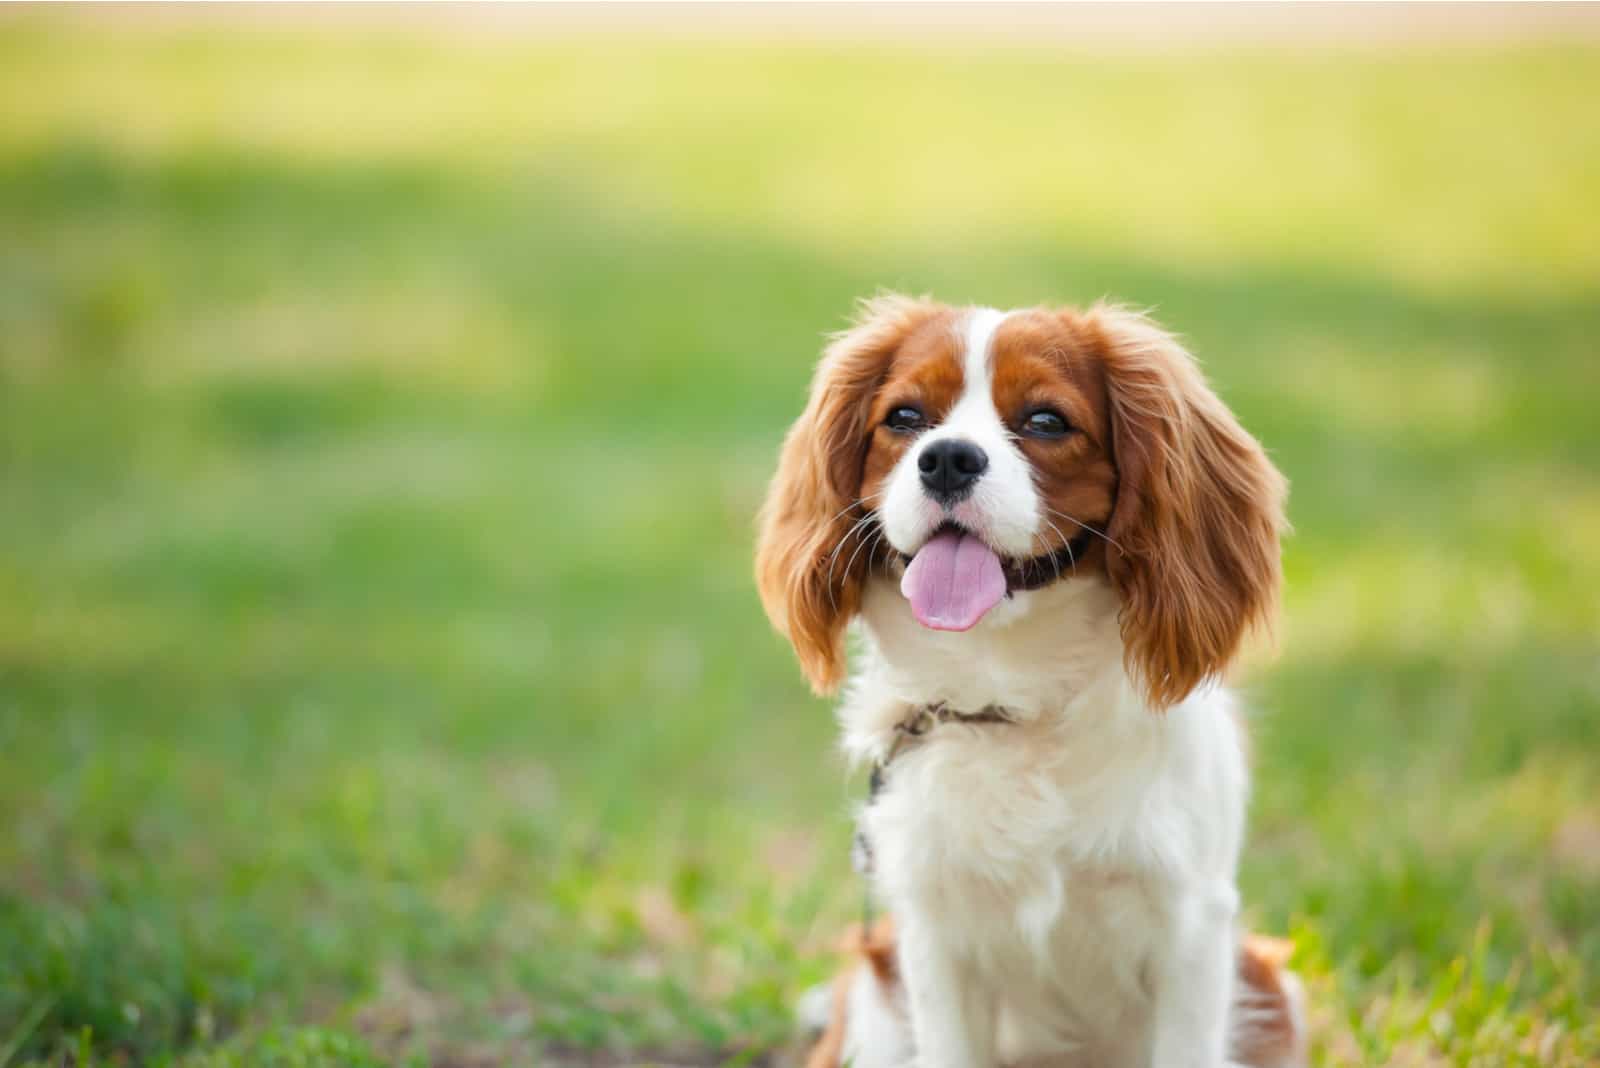 the cavalier king sits on the grass with his tongue out